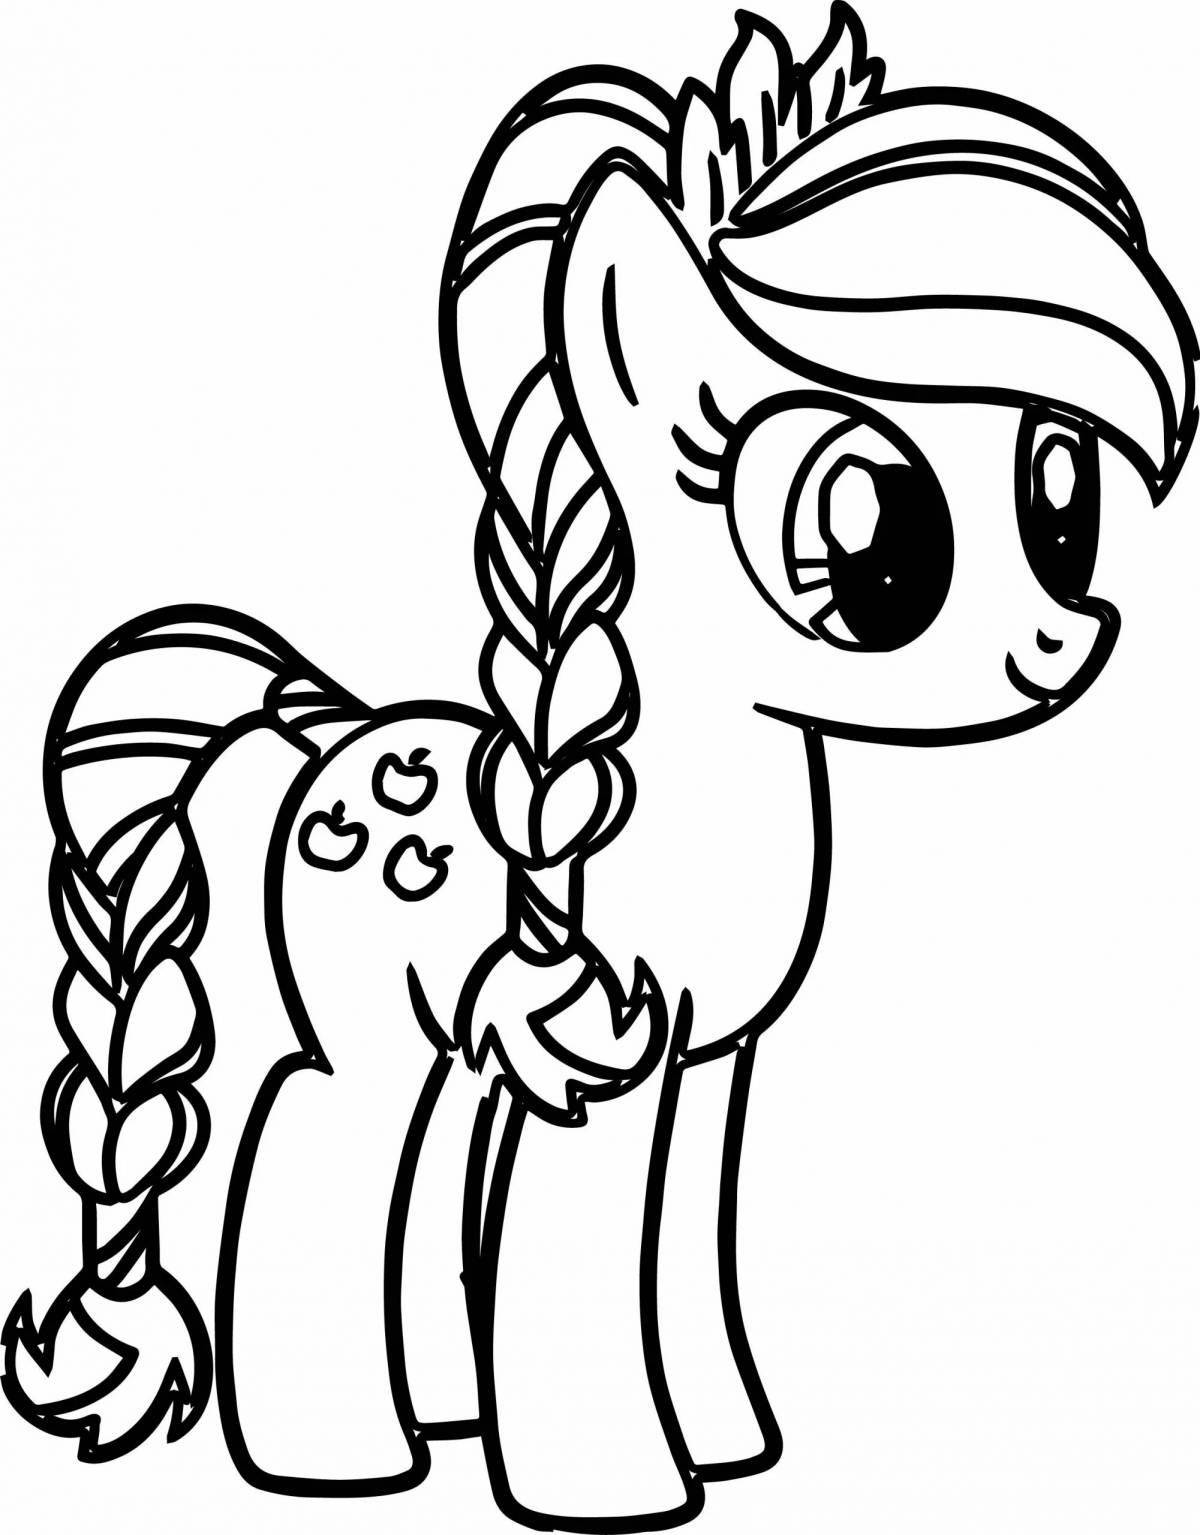 Bright pony pattern coloring page